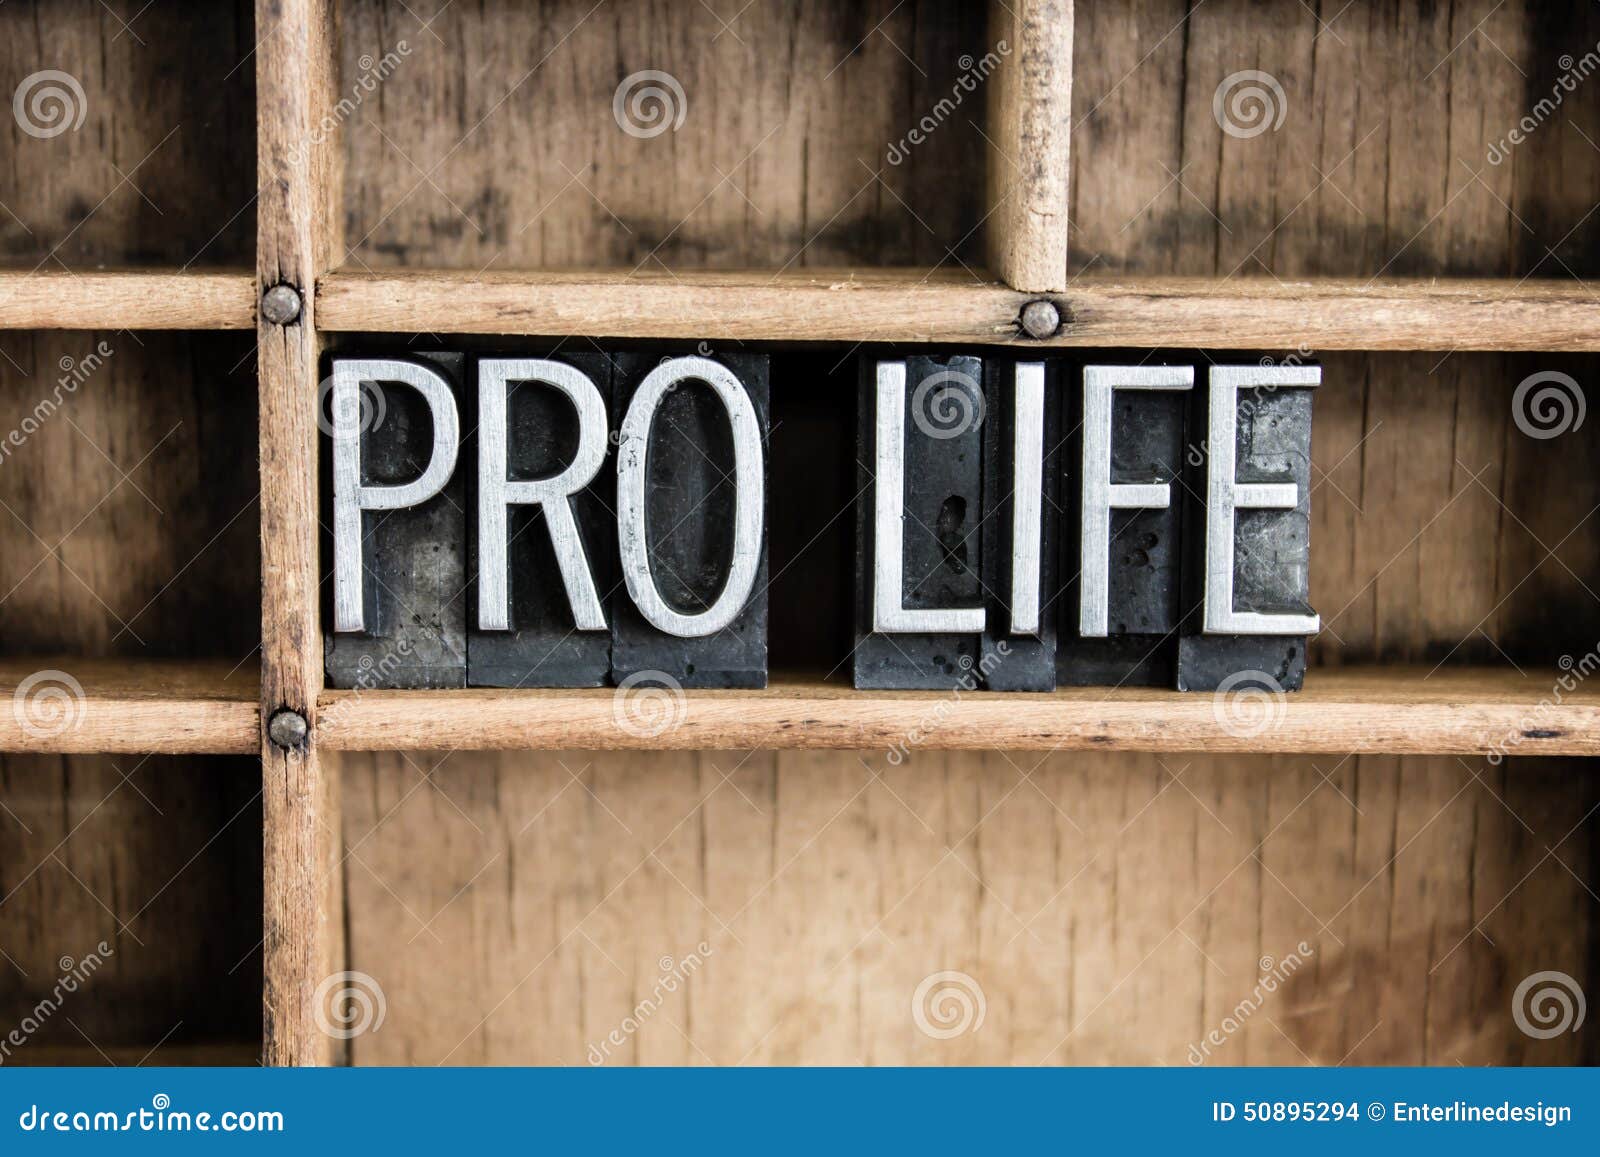 pro life concept metal letterpress word in drawer